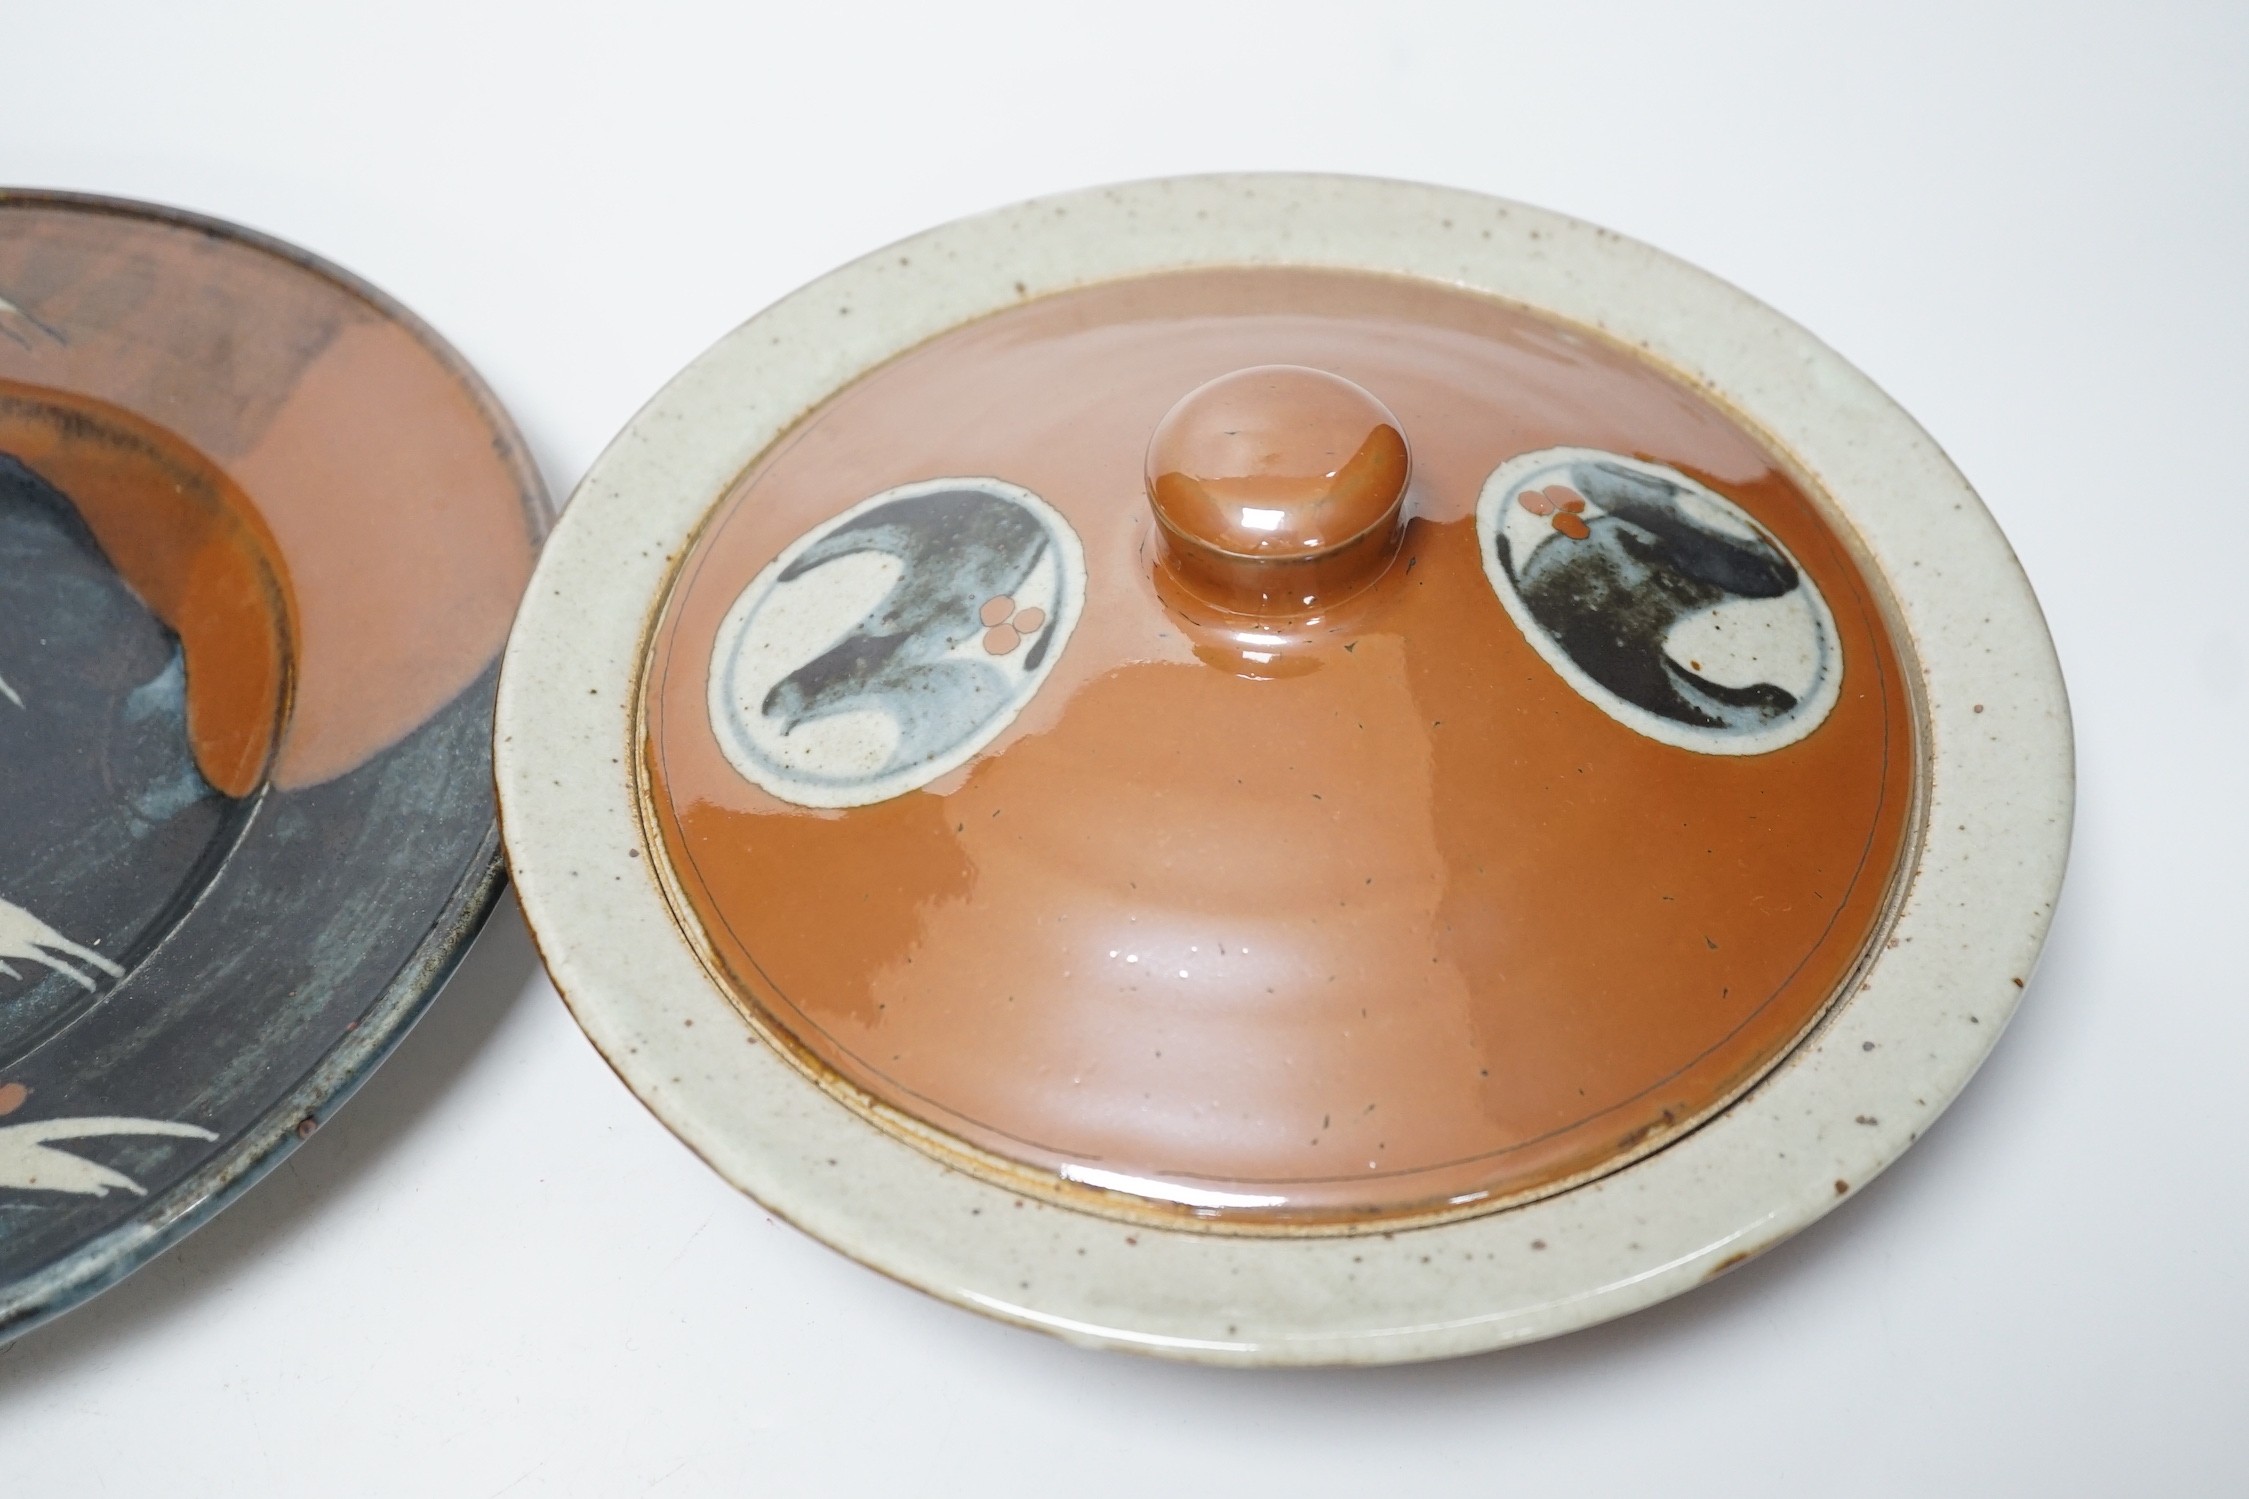 David Frith, Brookhouse studio pottery: a plate, covered bowl and a butter dish and cover, largest 28cm diameter